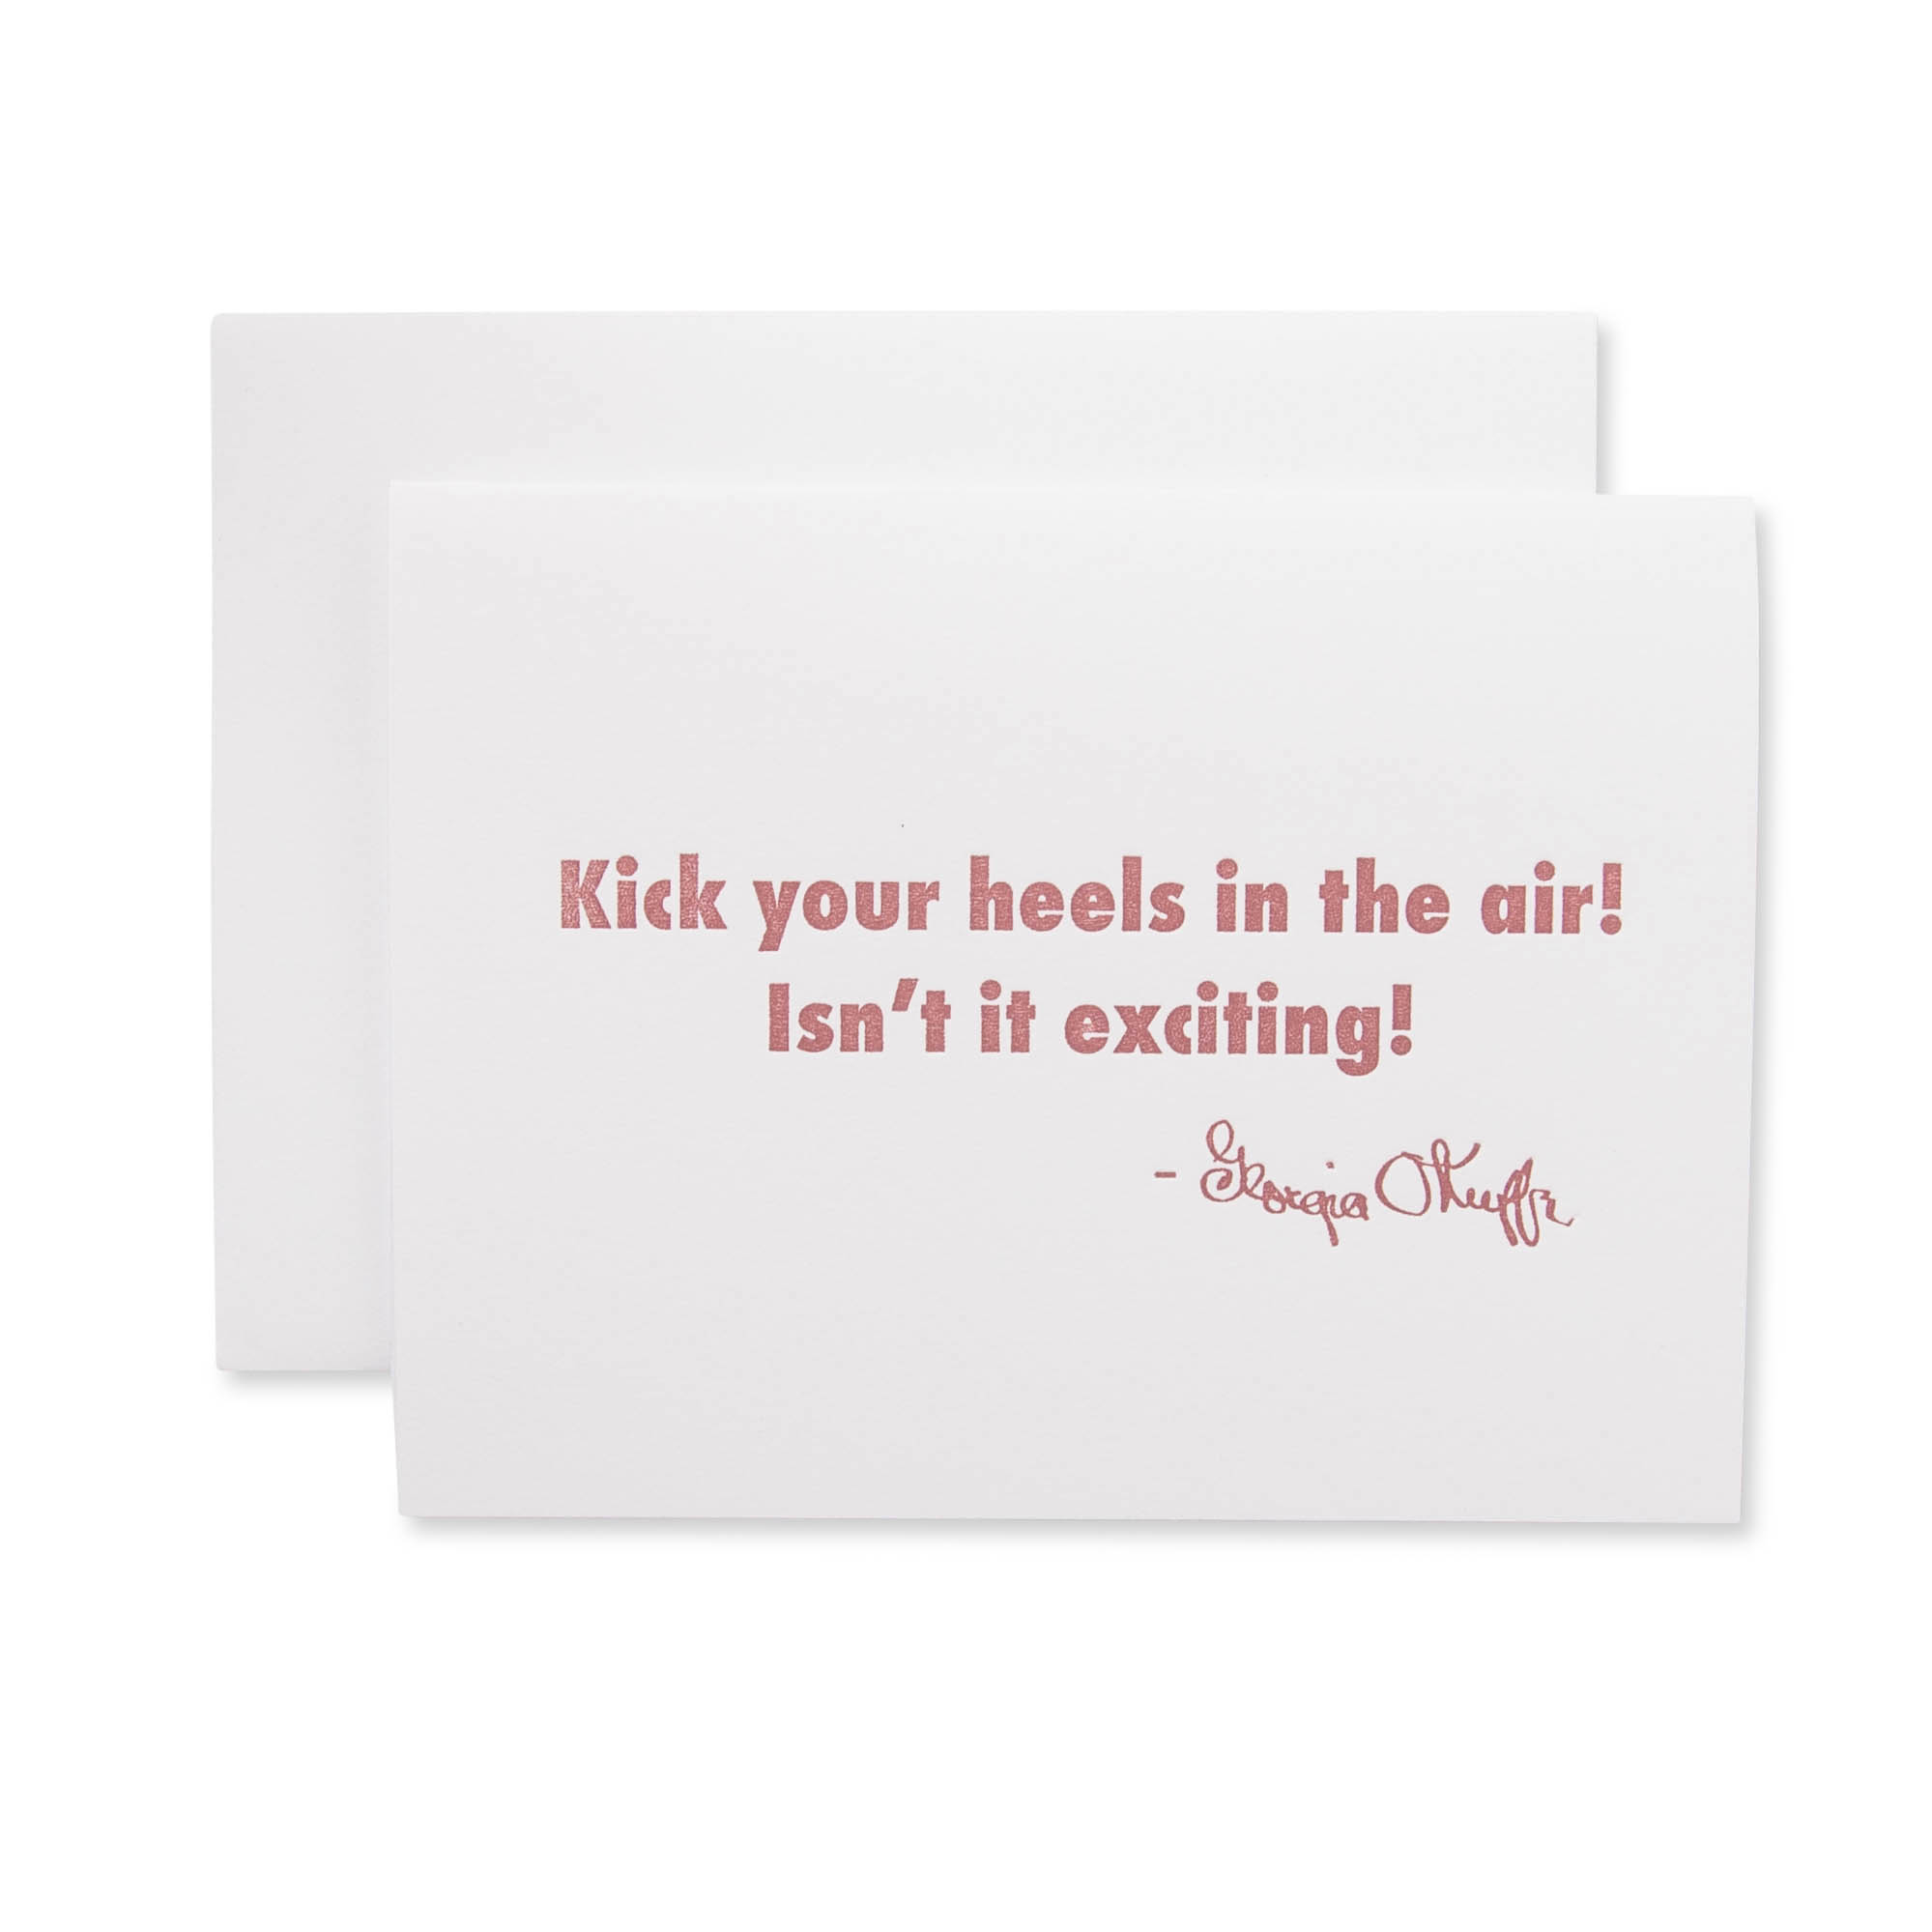 All the world's a stage. Kick up your heels. HAVE FUN!